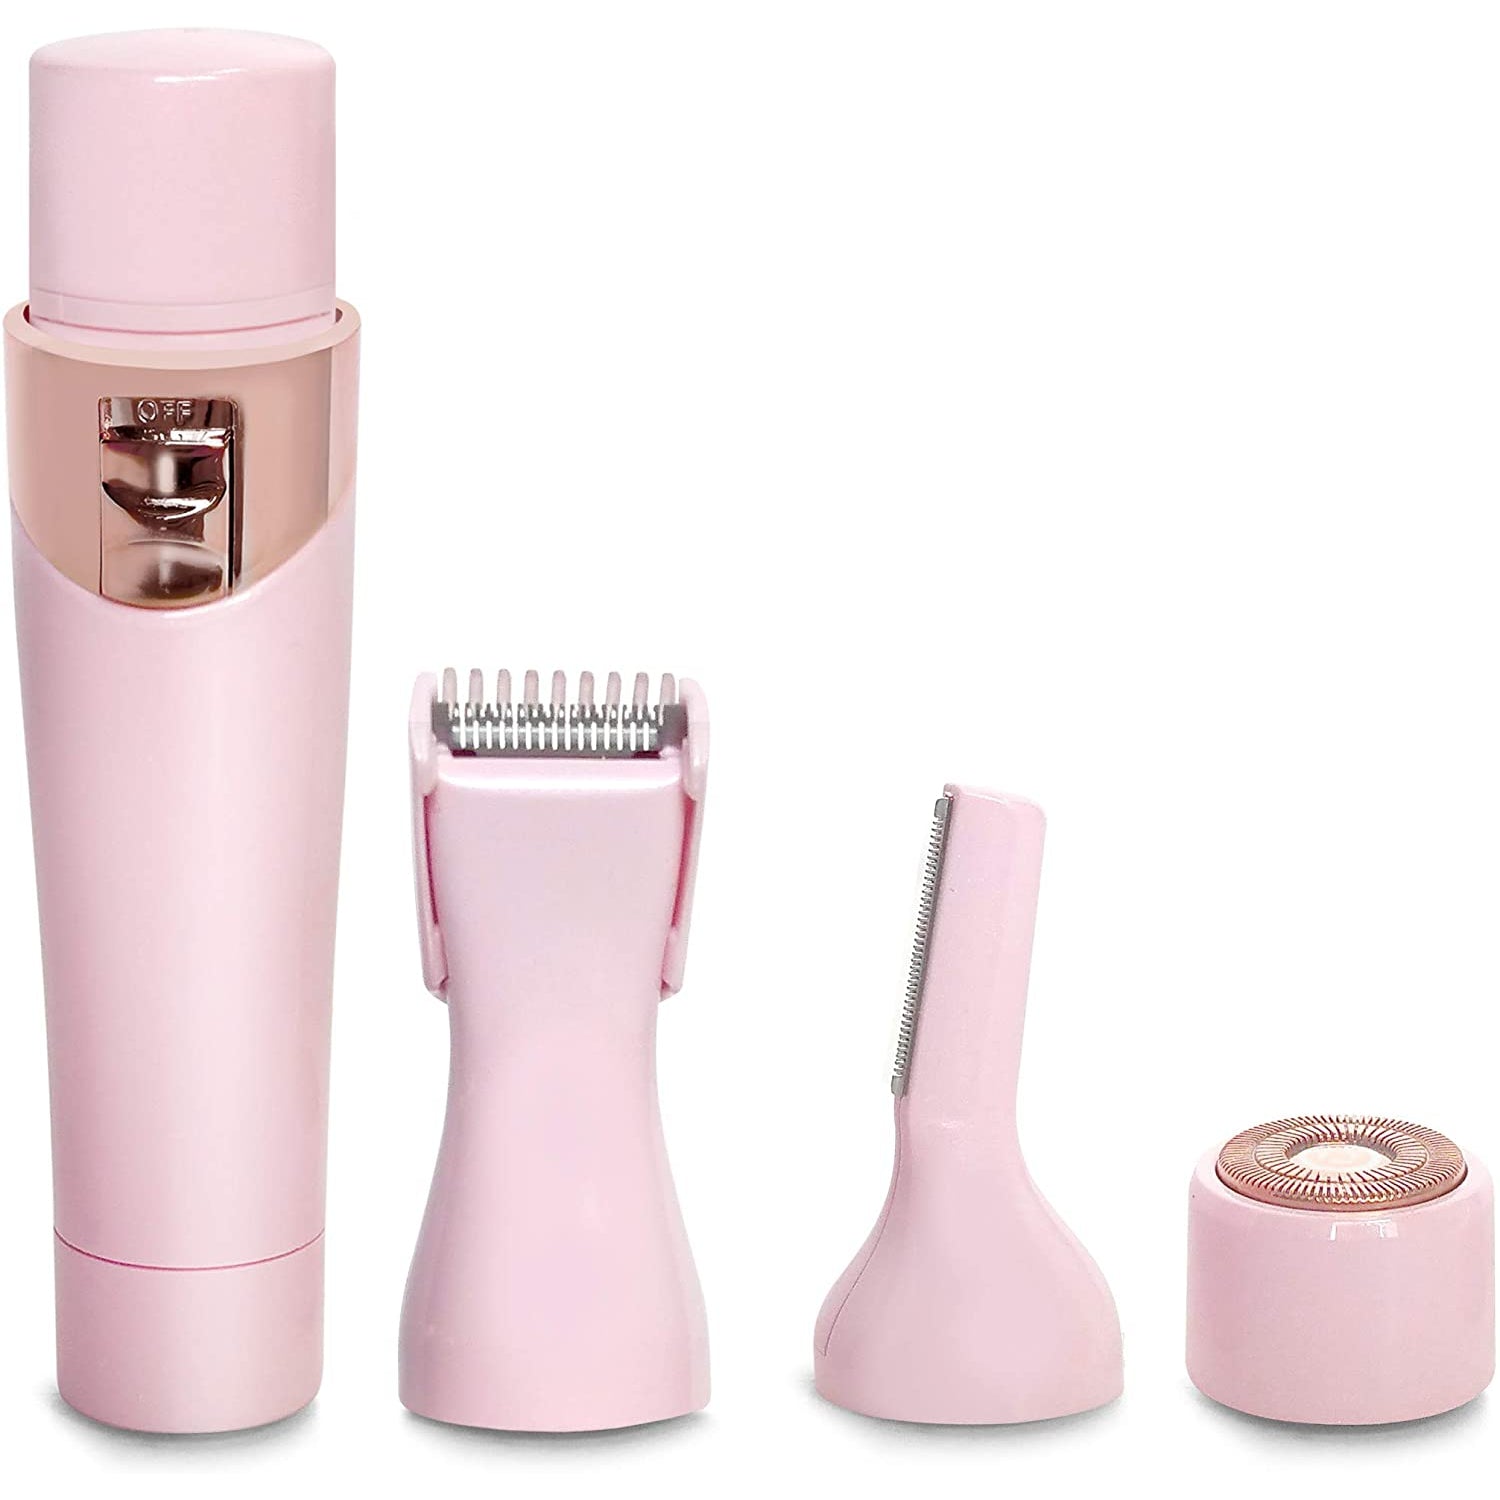 Magnitone FuzzOff 3-in-1 Rechargeable Precision Hair Trimmer